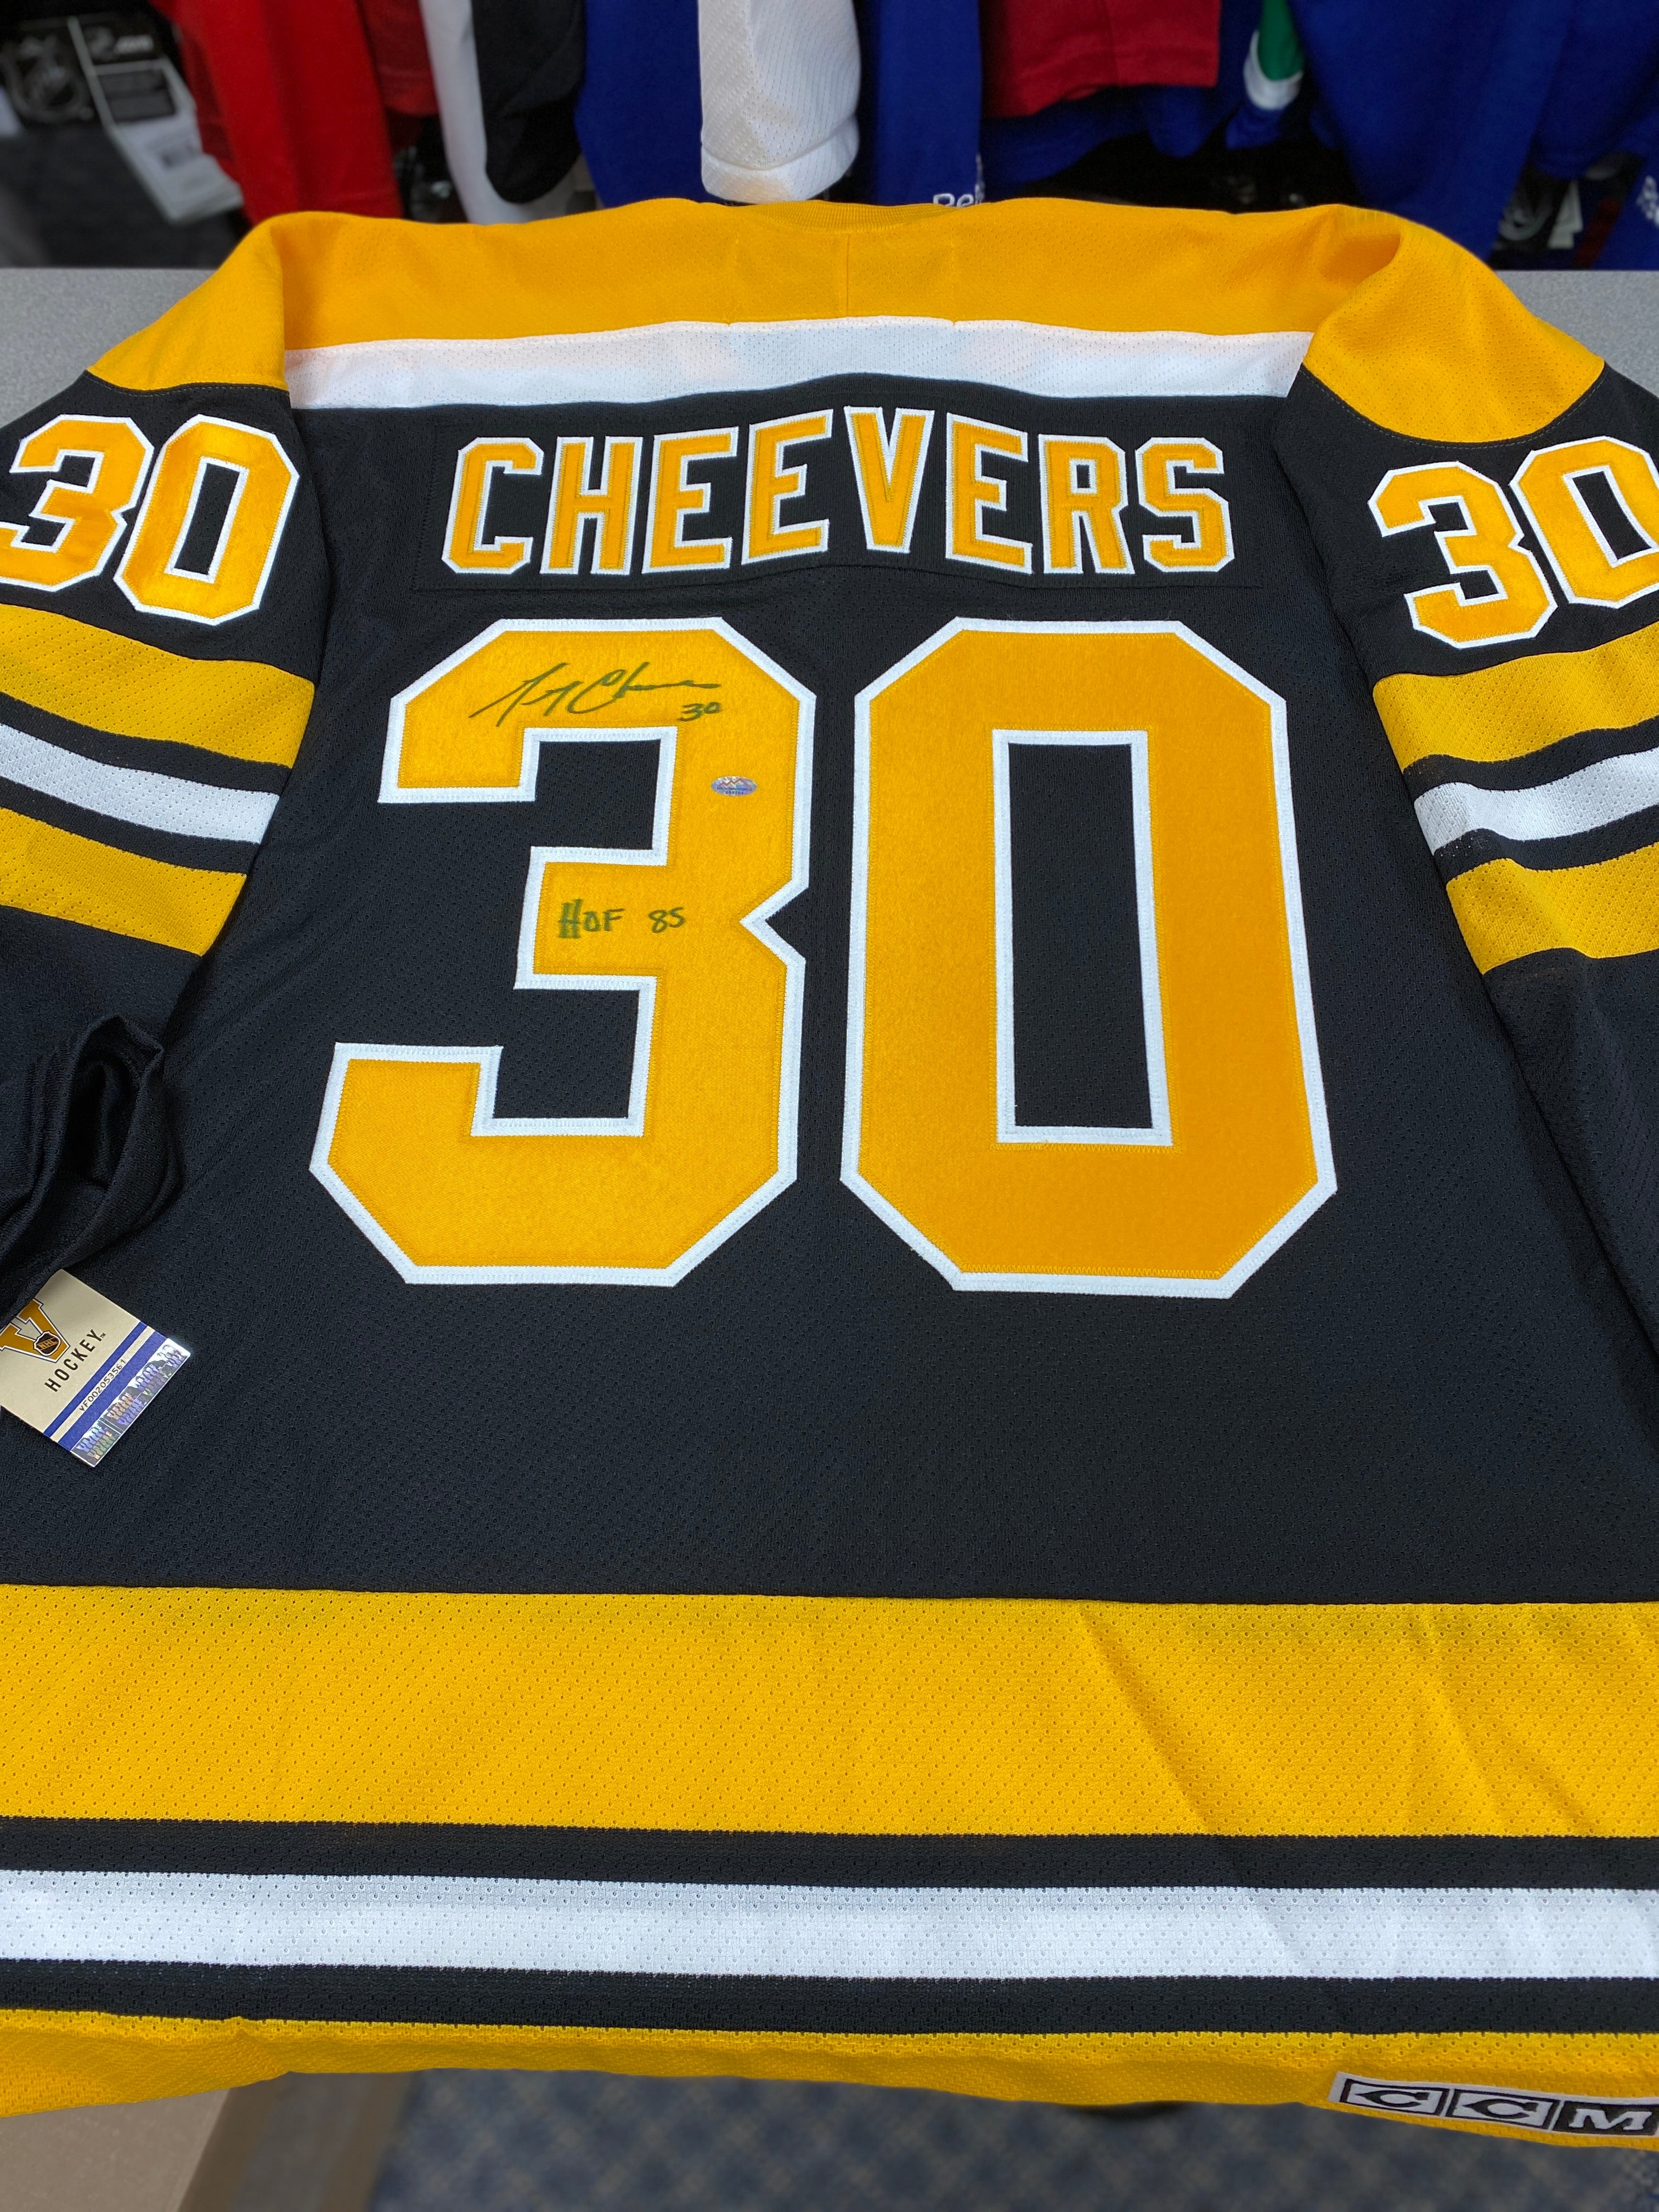 gerry cheevers signed jersey